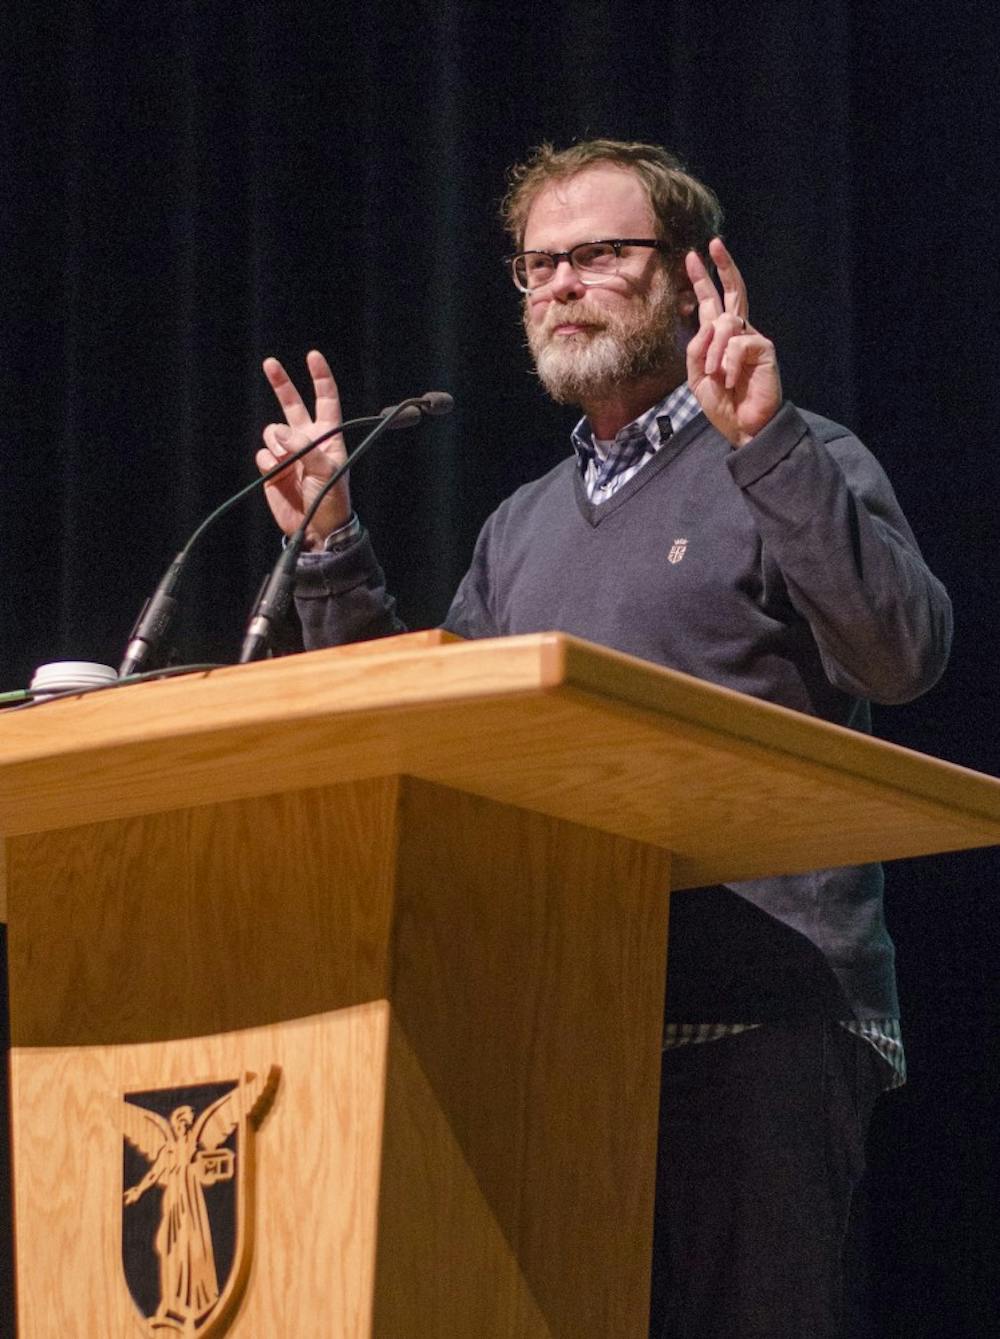 Rainn Wilson, co-creator, of SoulPancake talked to students on March 16 at John R. Emens Auditorium for the Excellence in Leadership speaker series. DN PHOTO BREANNA DAUGHERTY